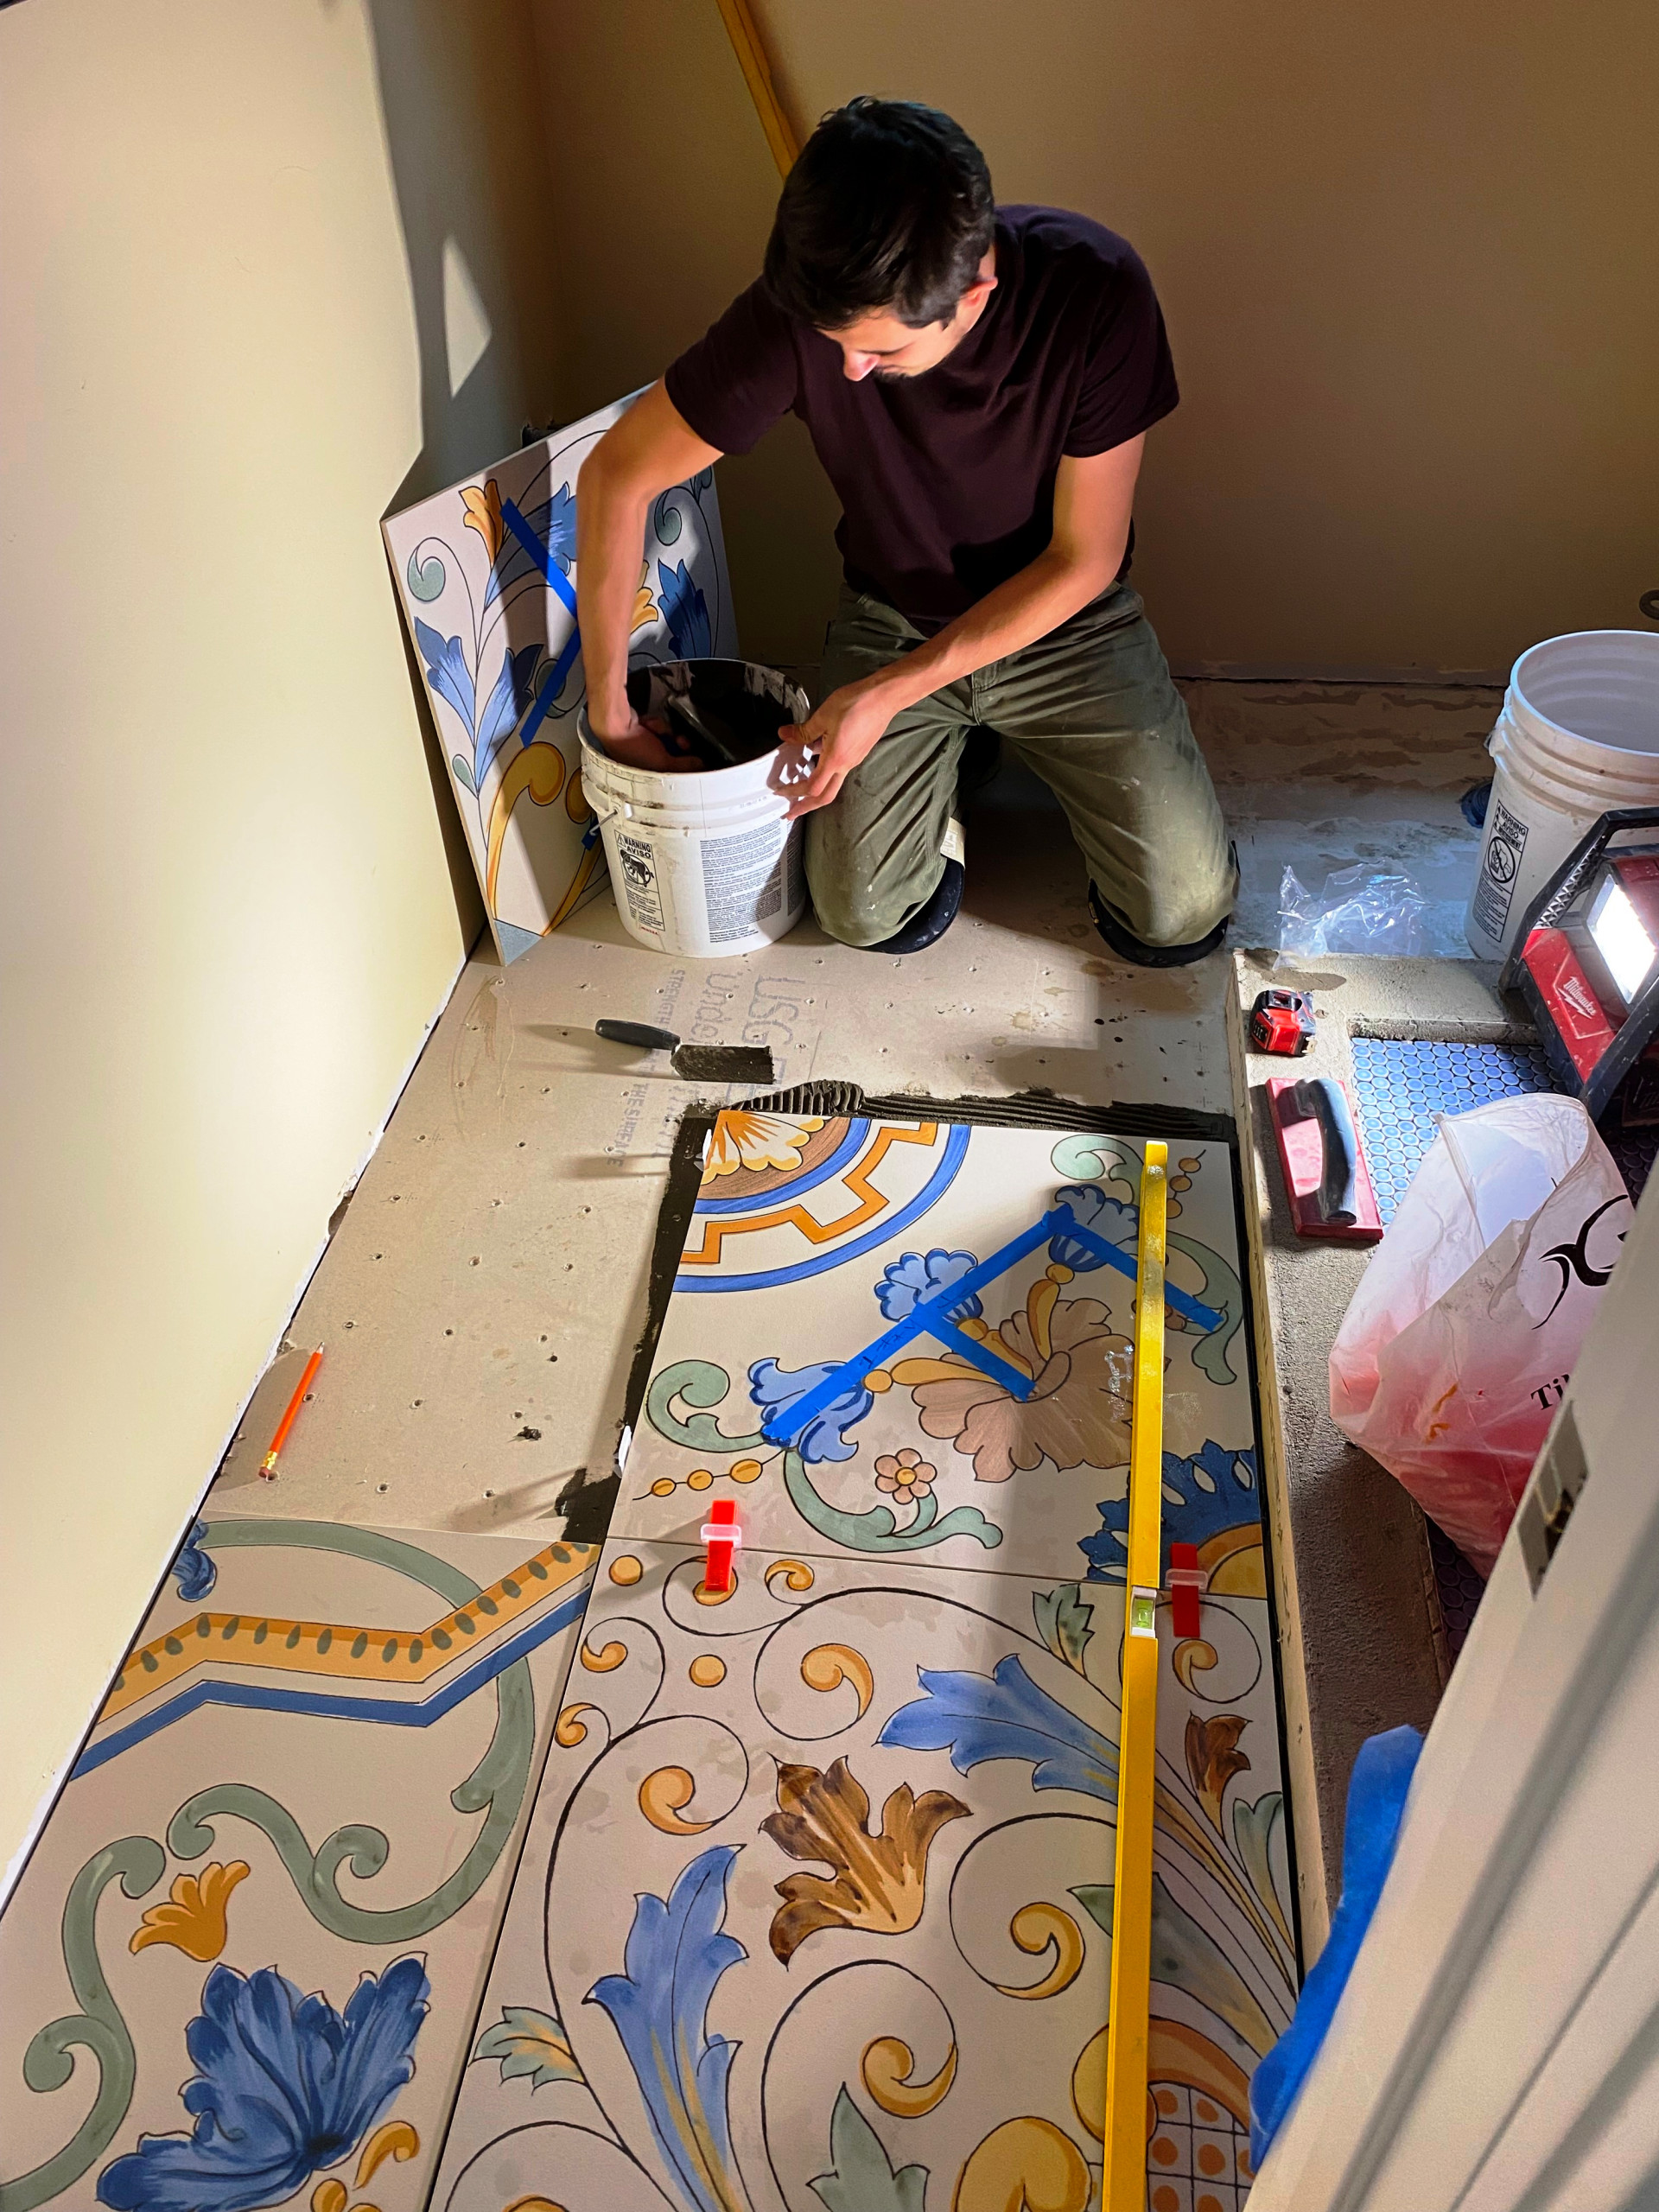 DURING PIC - CAREFULLY PLACED PATTERNED TILE INSTALLED